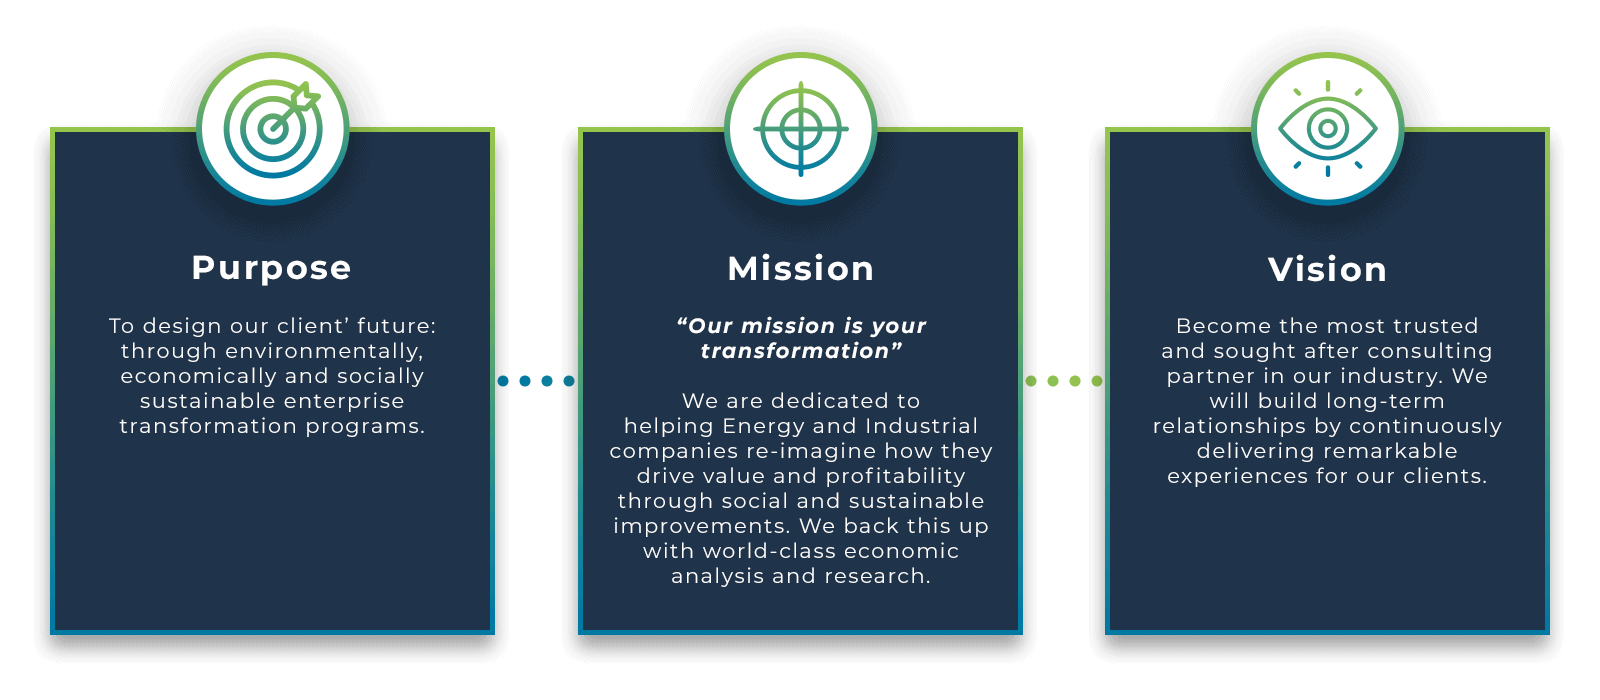 Purpose and Mission image for Desktop